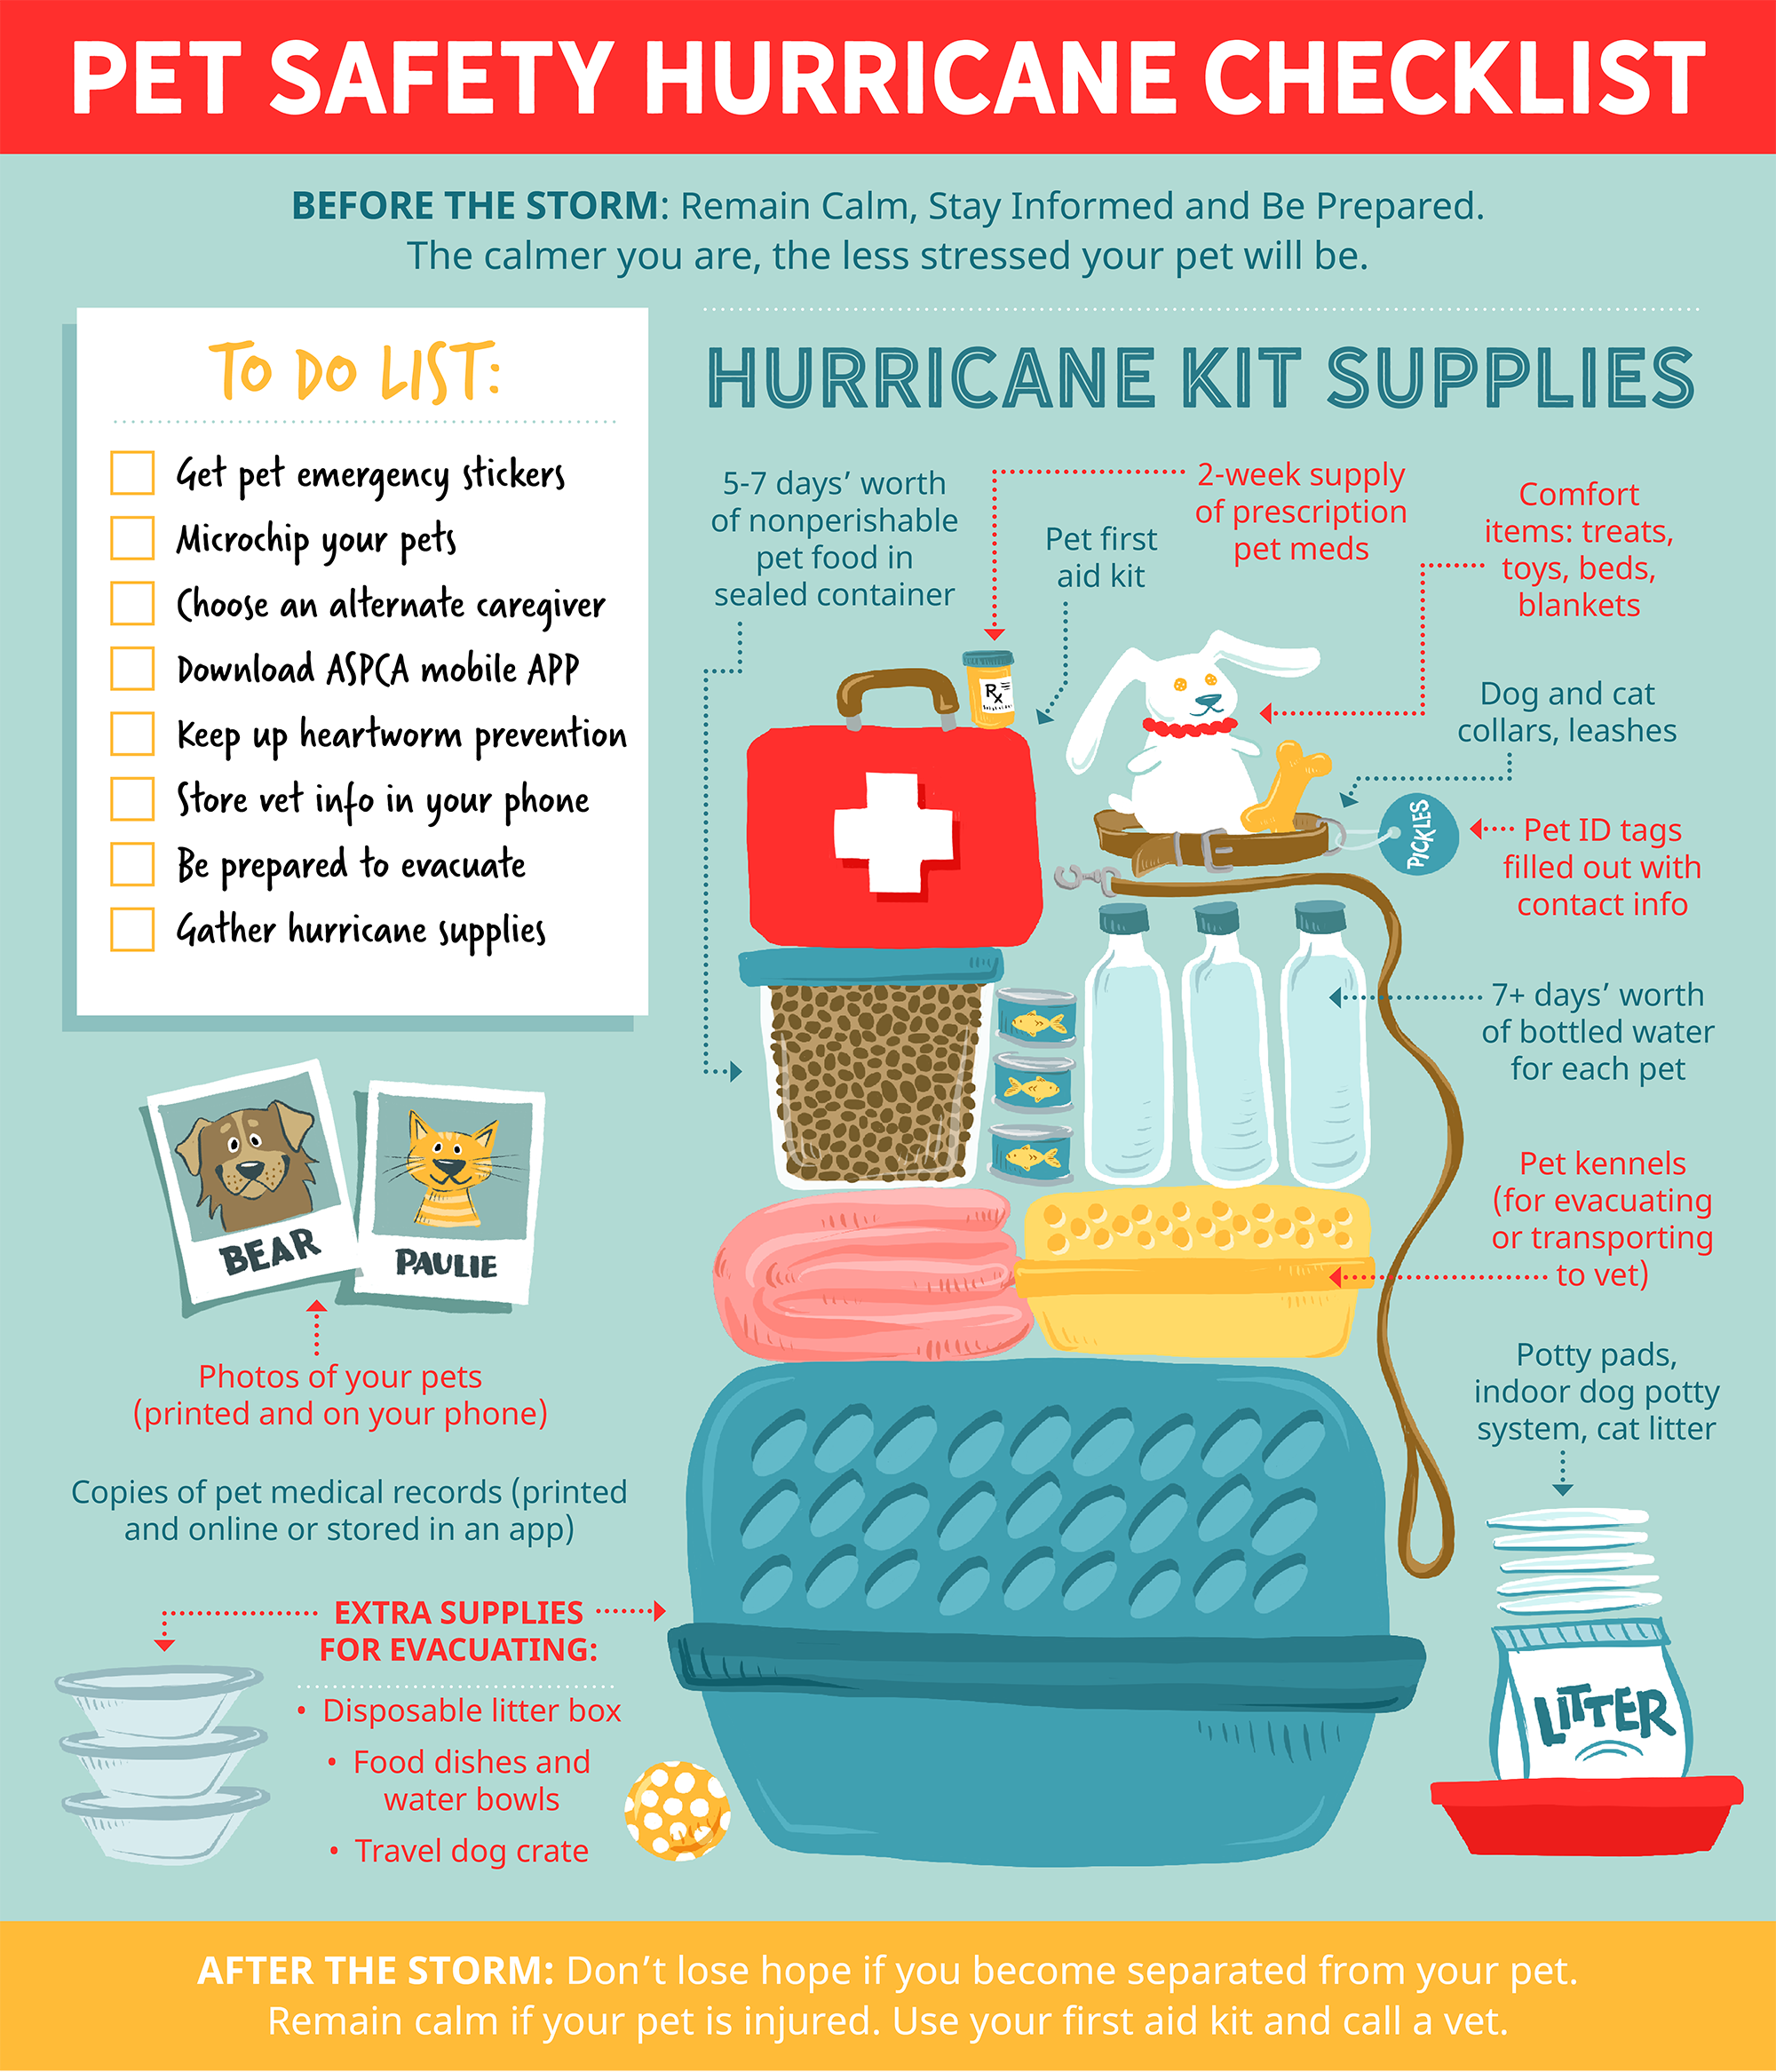 14 Hurricane Safety Tips for Pets | PetMD